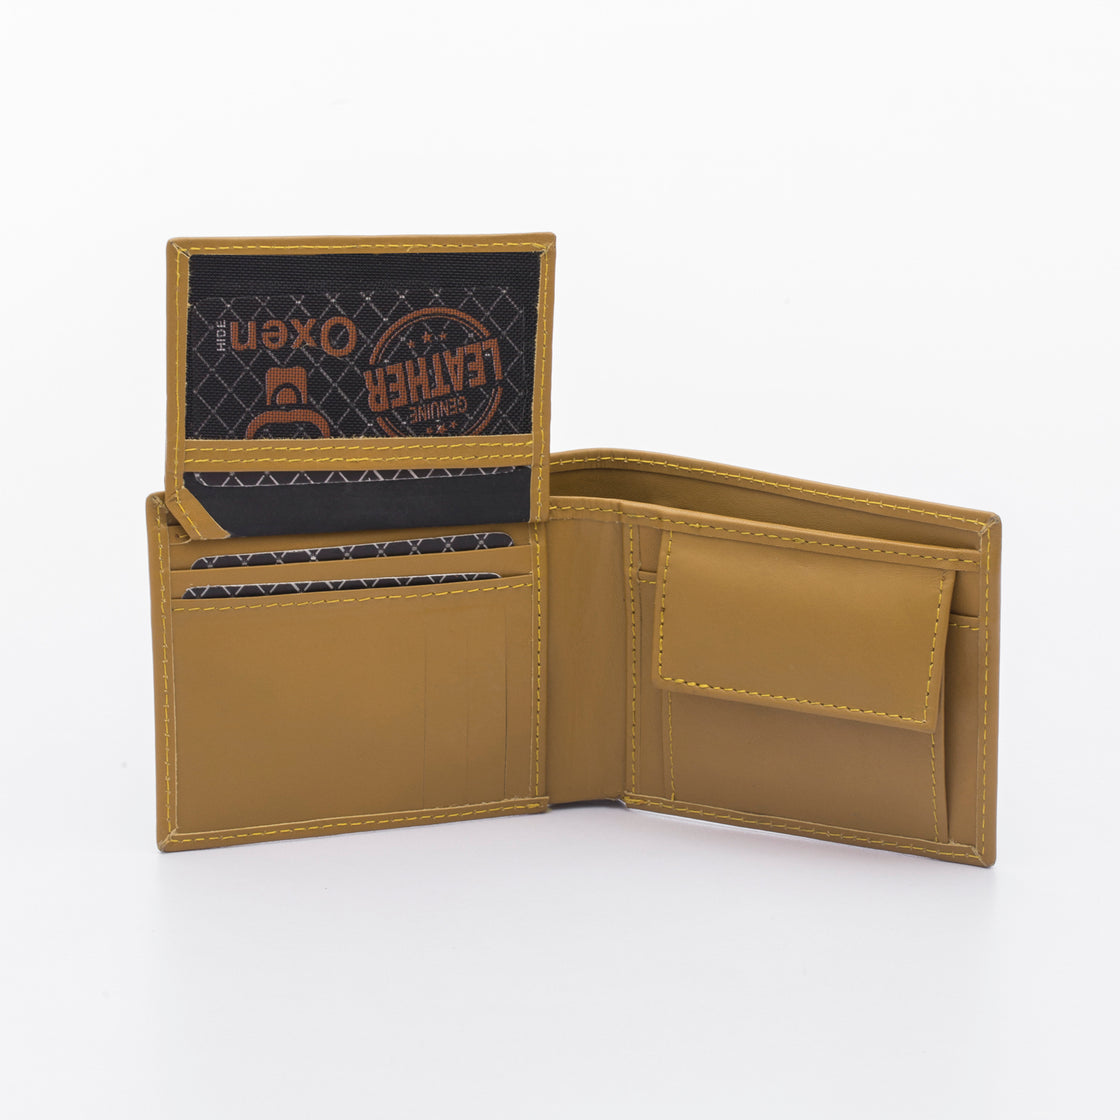 Vellox Leather Wallet